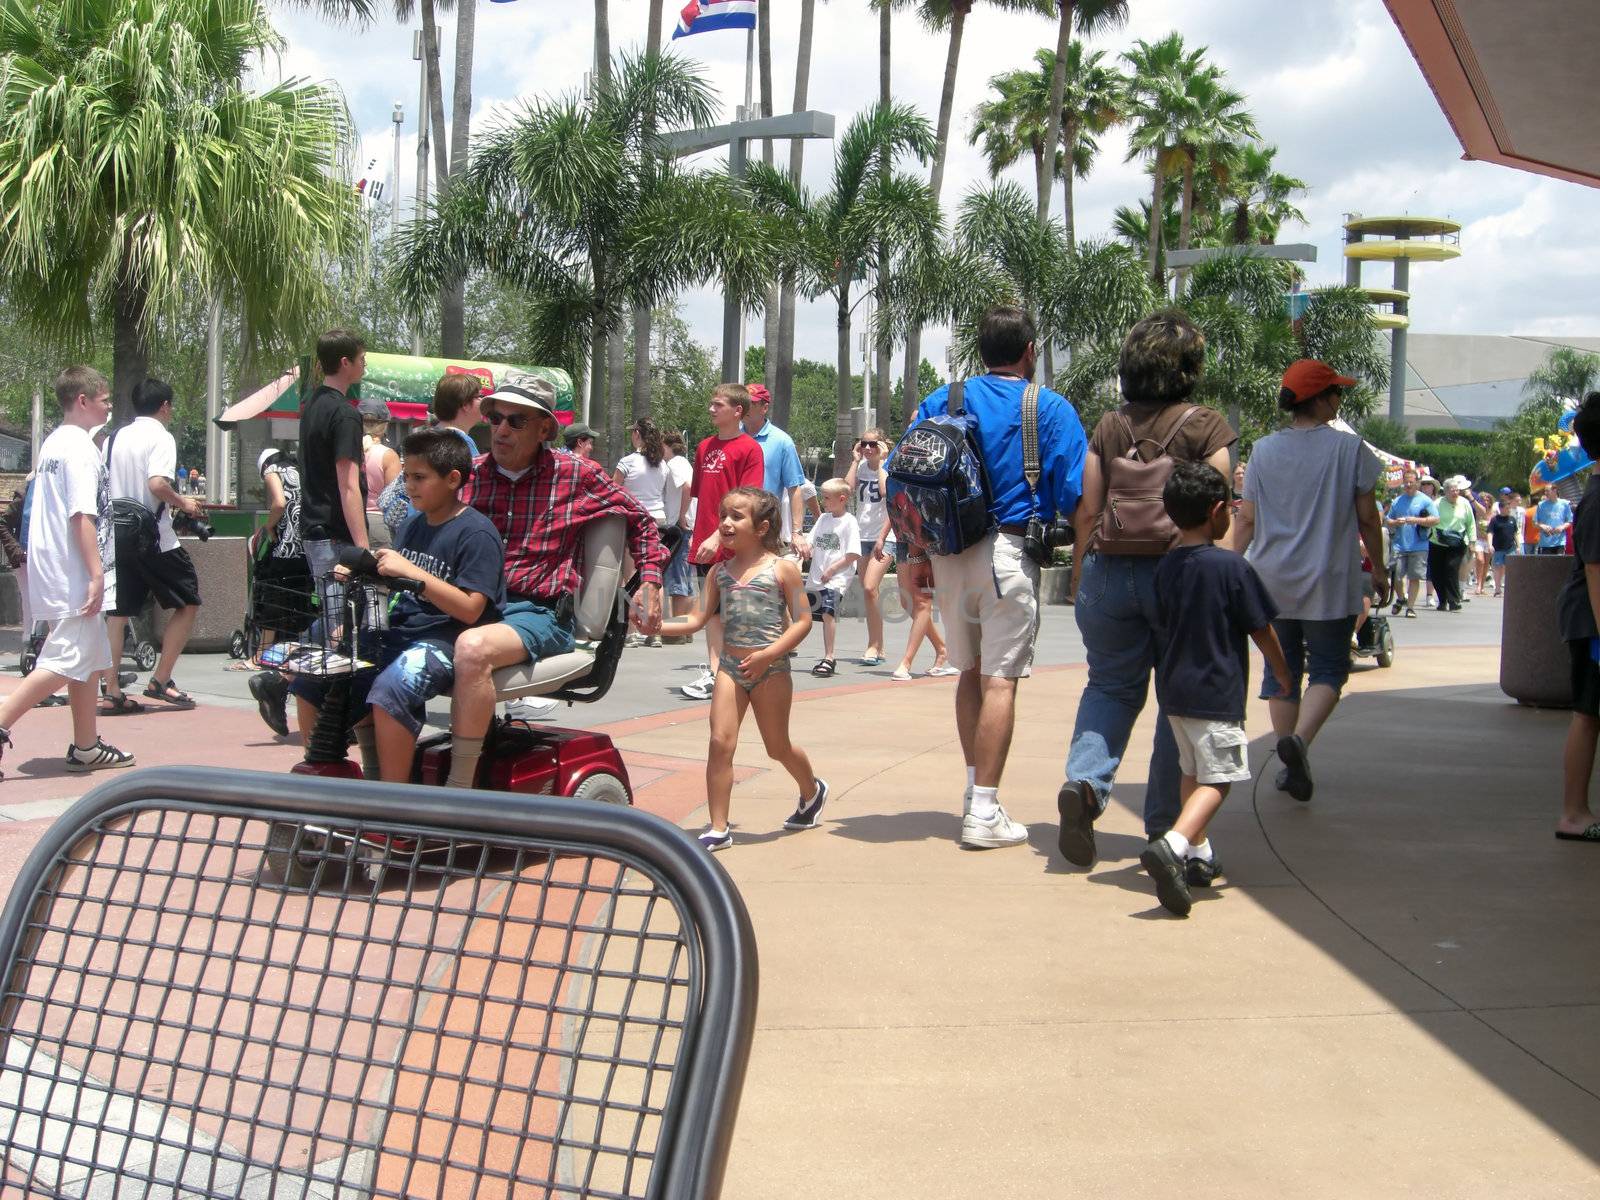 Crowds of people are milling around at a theme park in Orlando Florida